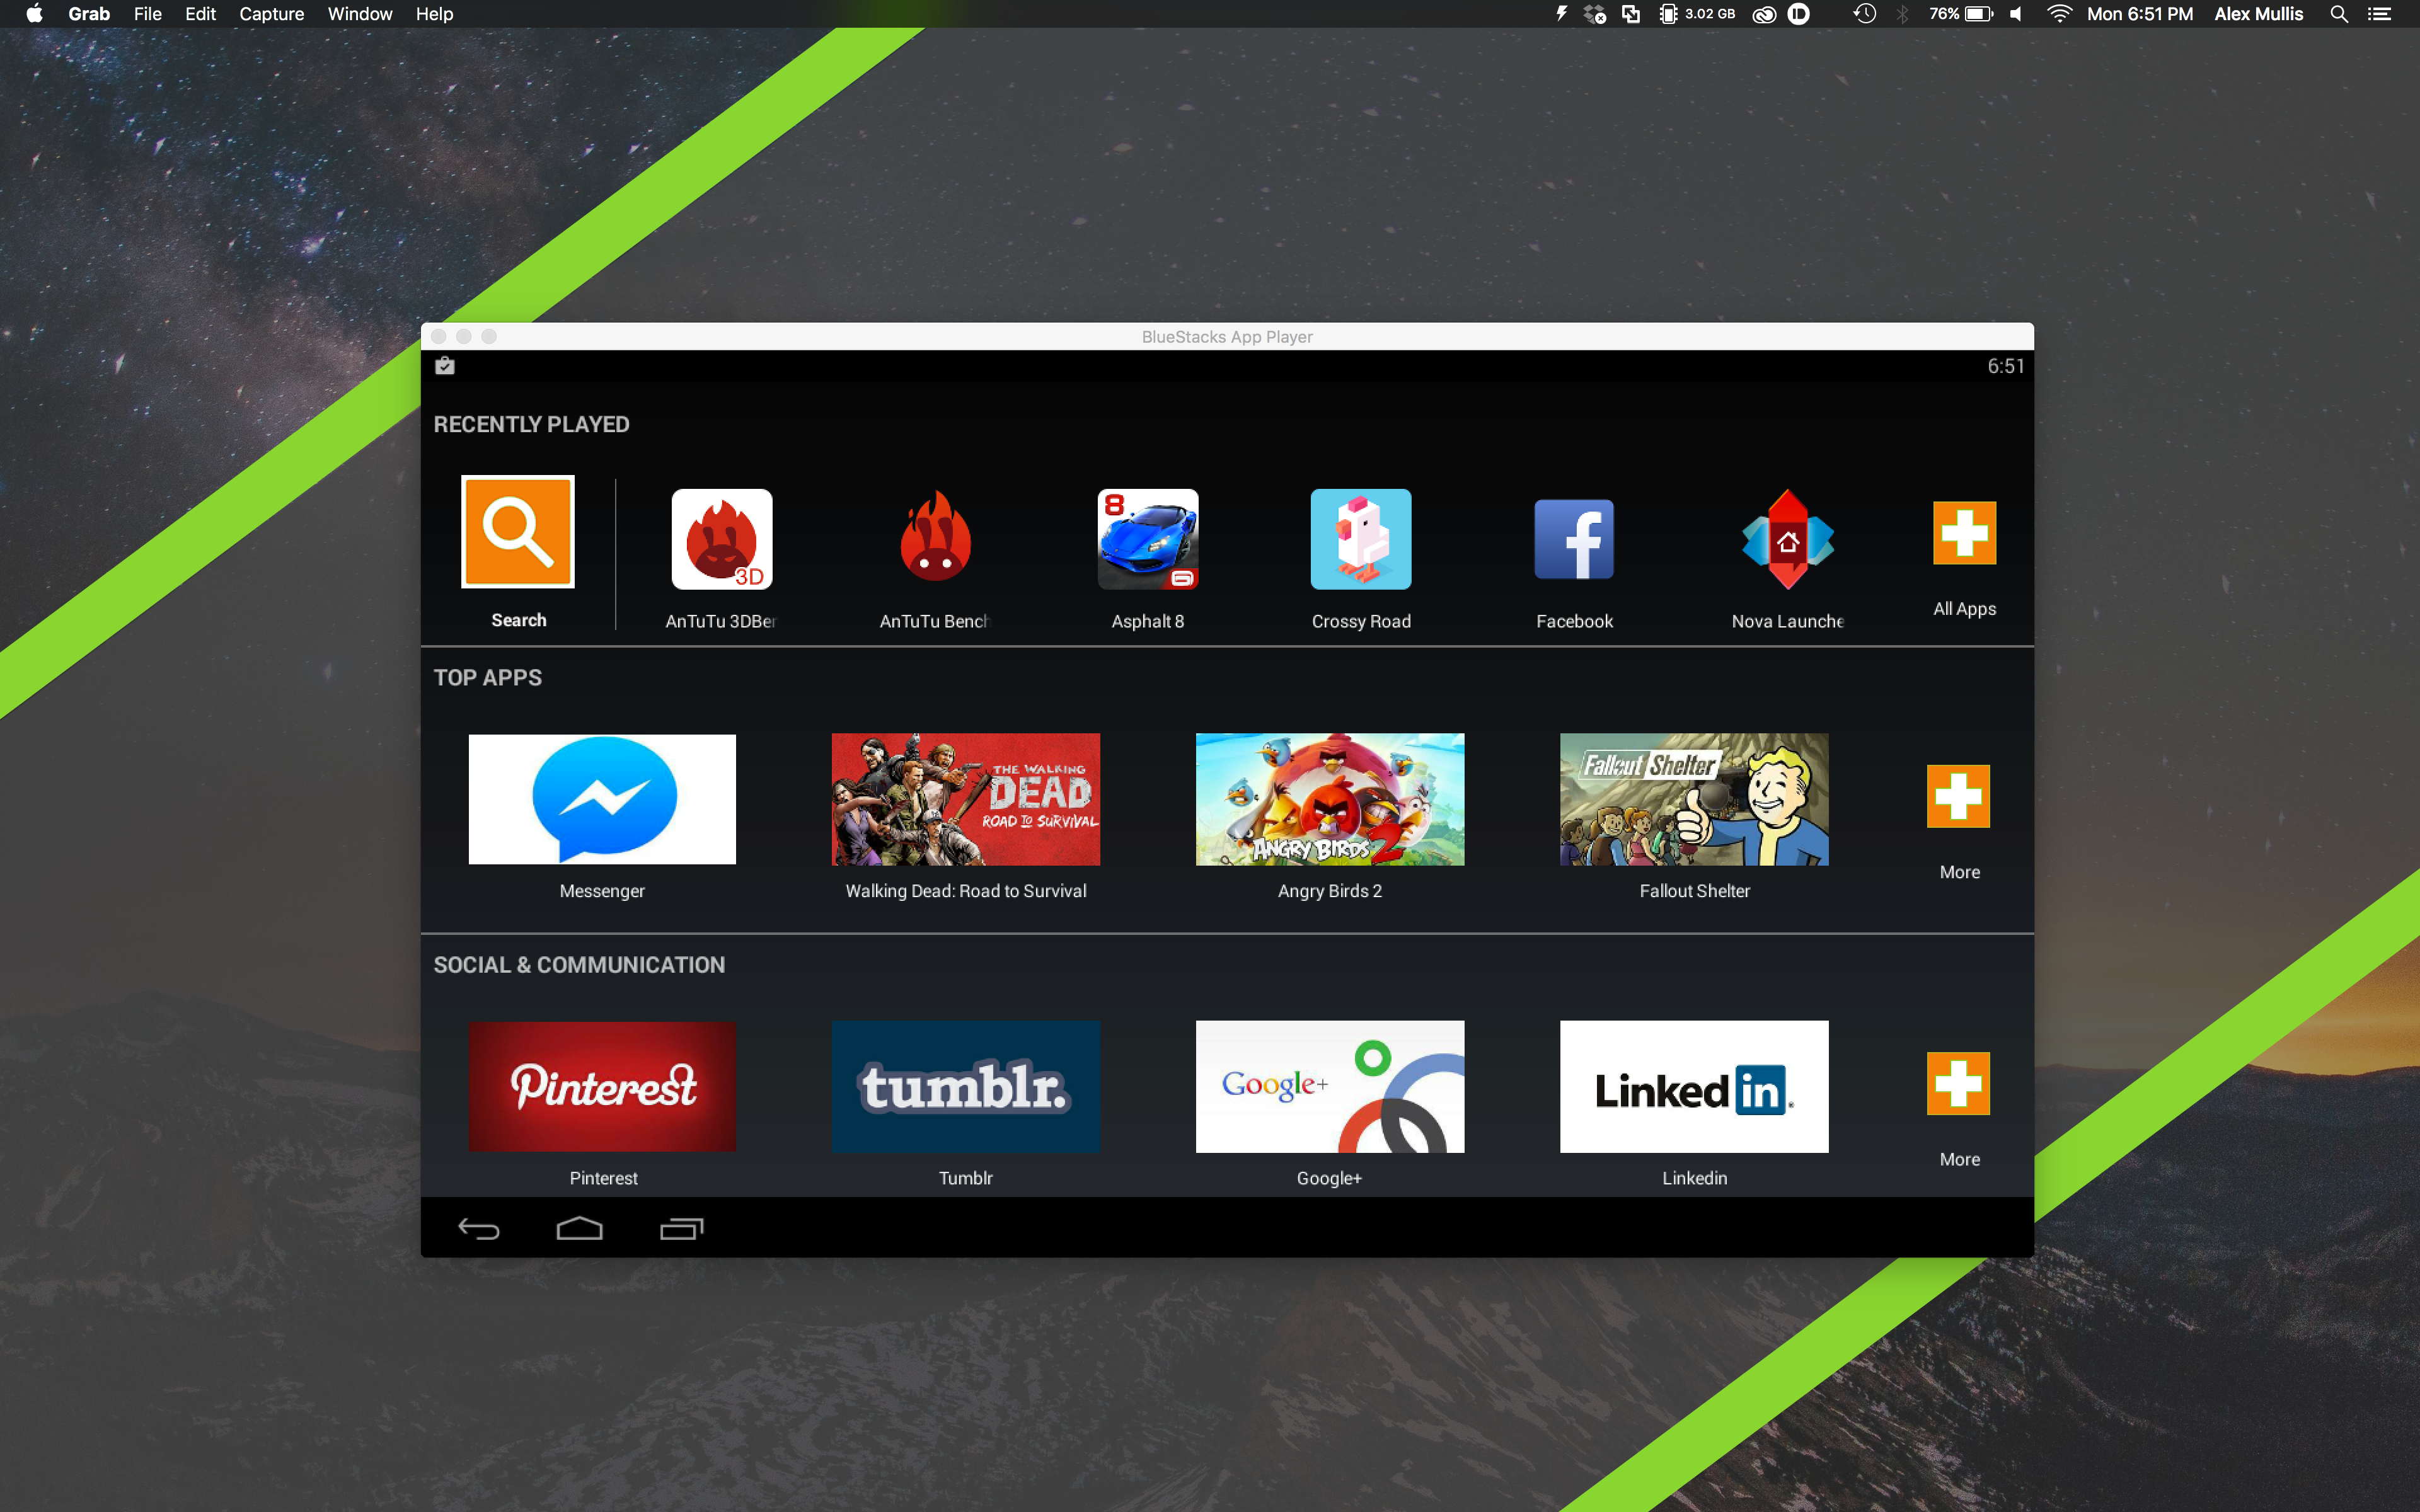 How to install Android on PC - we take you through several options